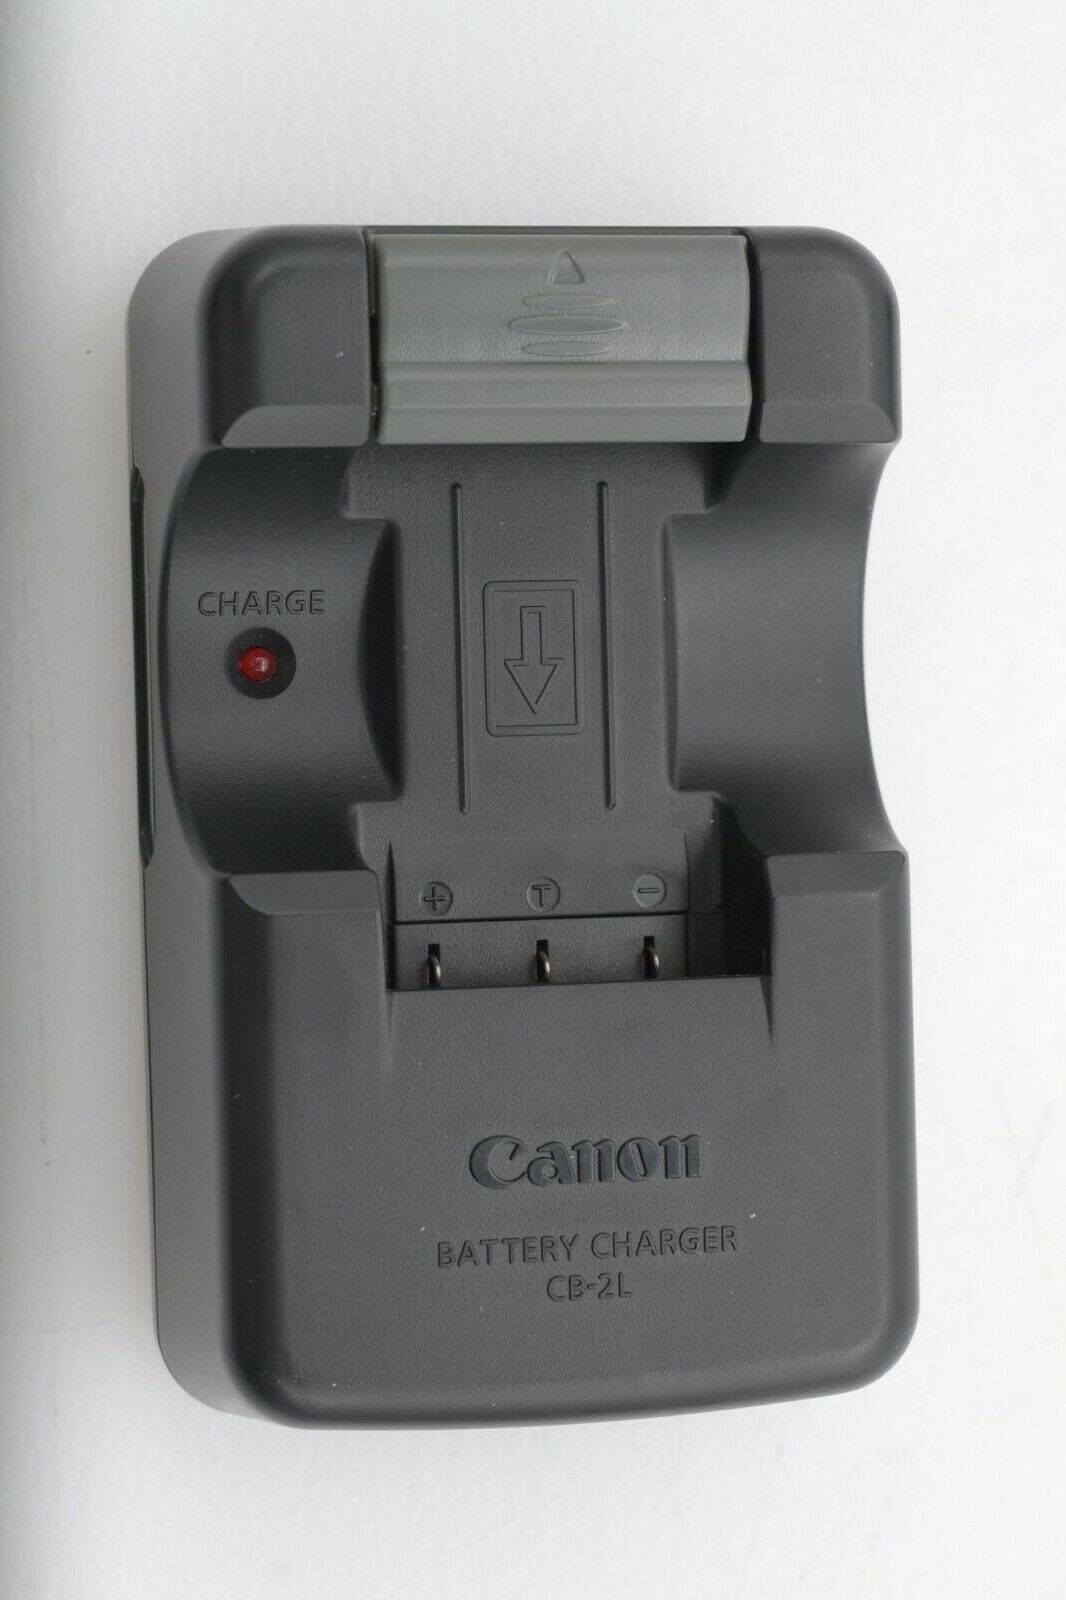 EXC++ GENUINE CANON CB-2L BATTERY CHARGER